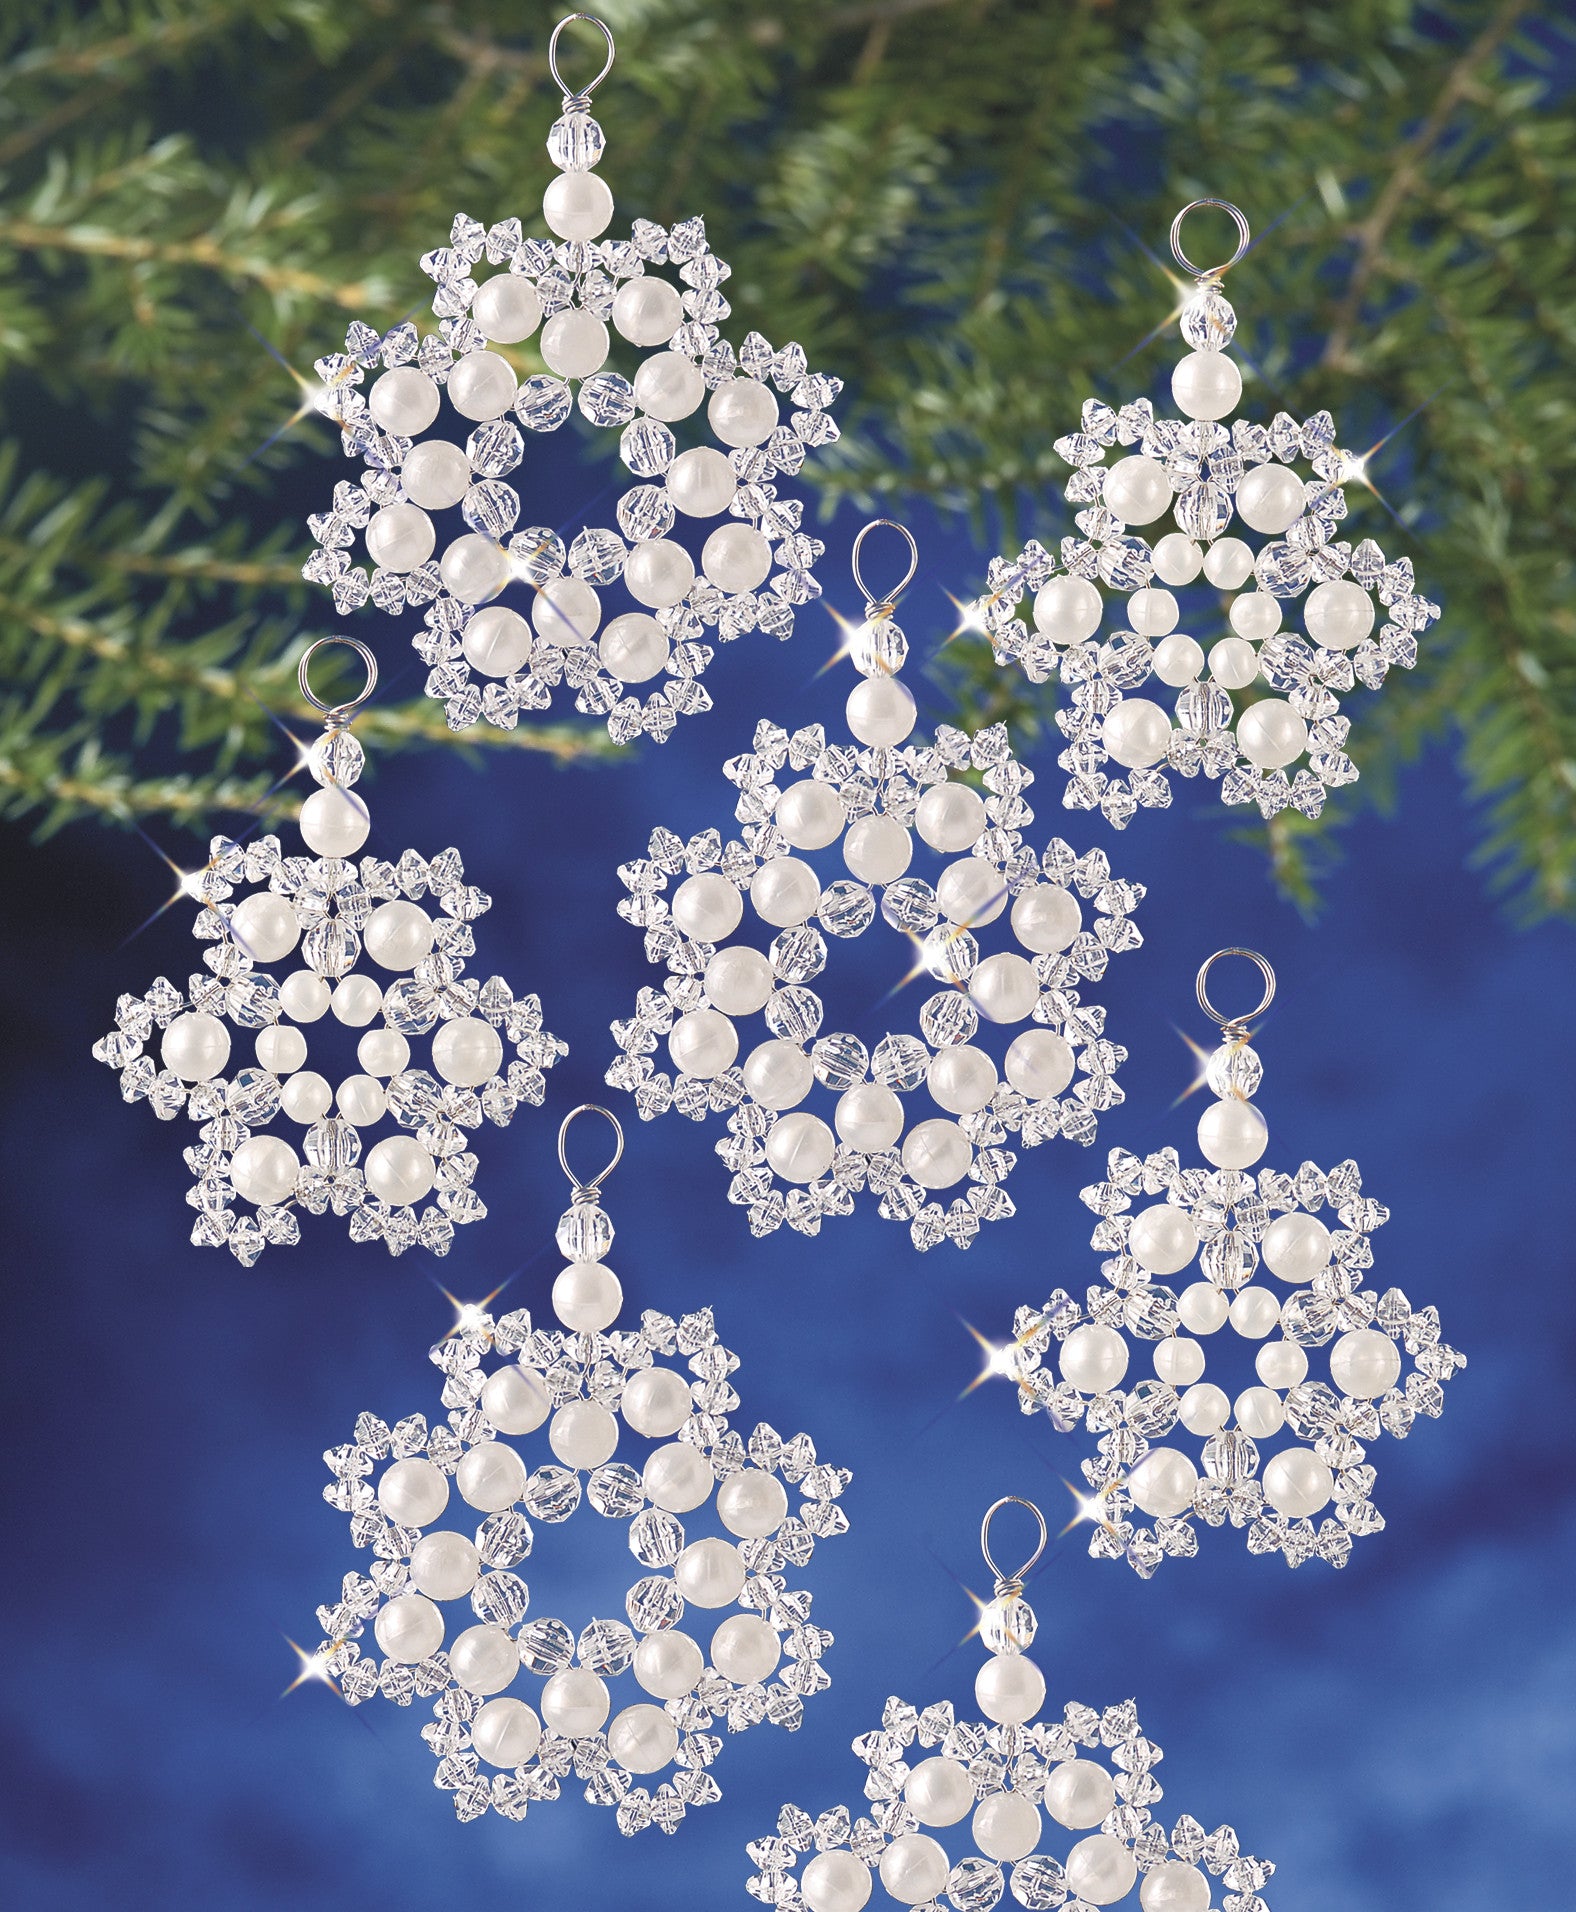 Beadery Holiday Ornament Kit Crystal & Pearl Flakes #7335 - Beadery Products